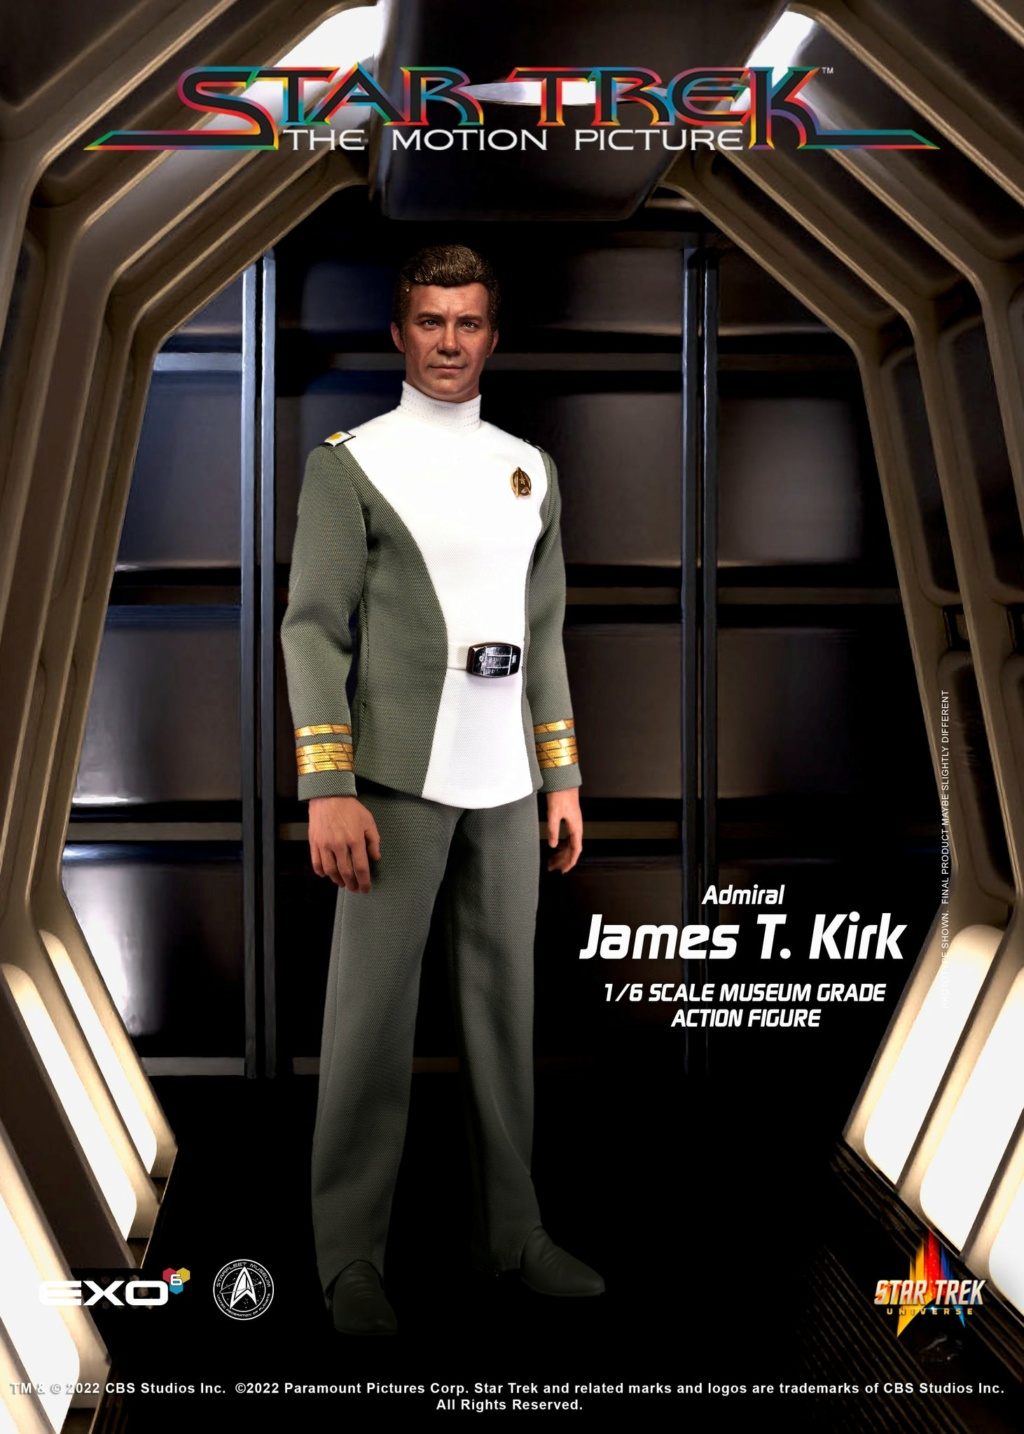 AdmiralJamesTKirk - NEW PRODUCT: EXO-6: STAR TREK: THE MOTION PICTURE: ADMIRAL JAMES T. KIRK 1/6 scale figure (LIMITED & IMMEDIATE AVAILABILITY RELEASE) 5679